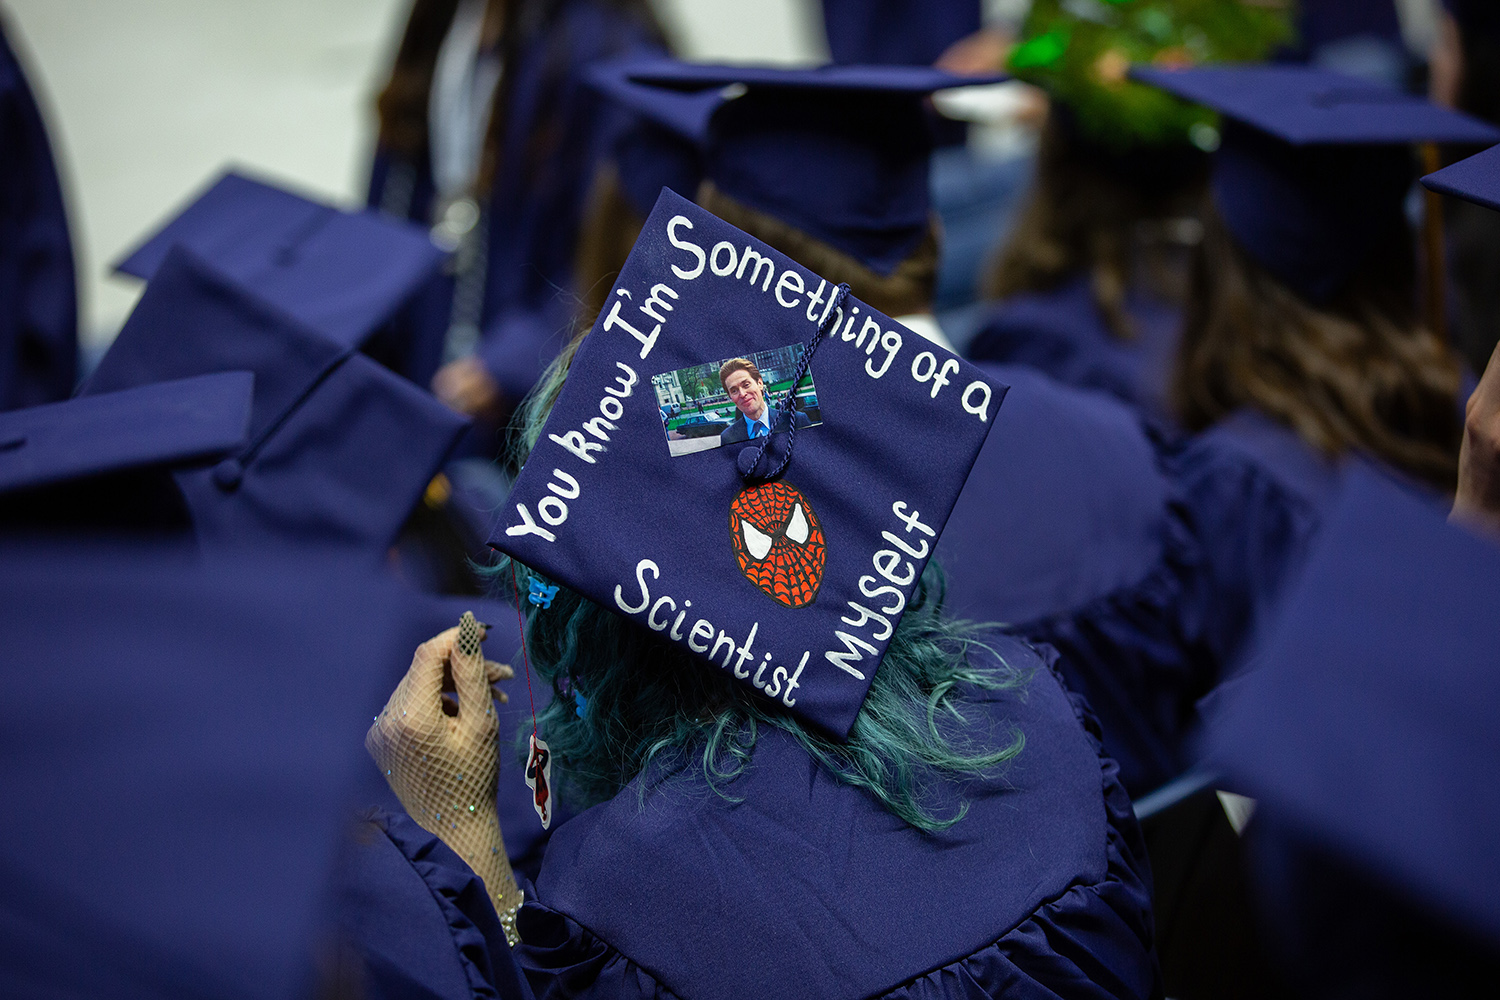 Graduation cap reads "You know I'm something of a scientist myself" with a photo of Spiderman.